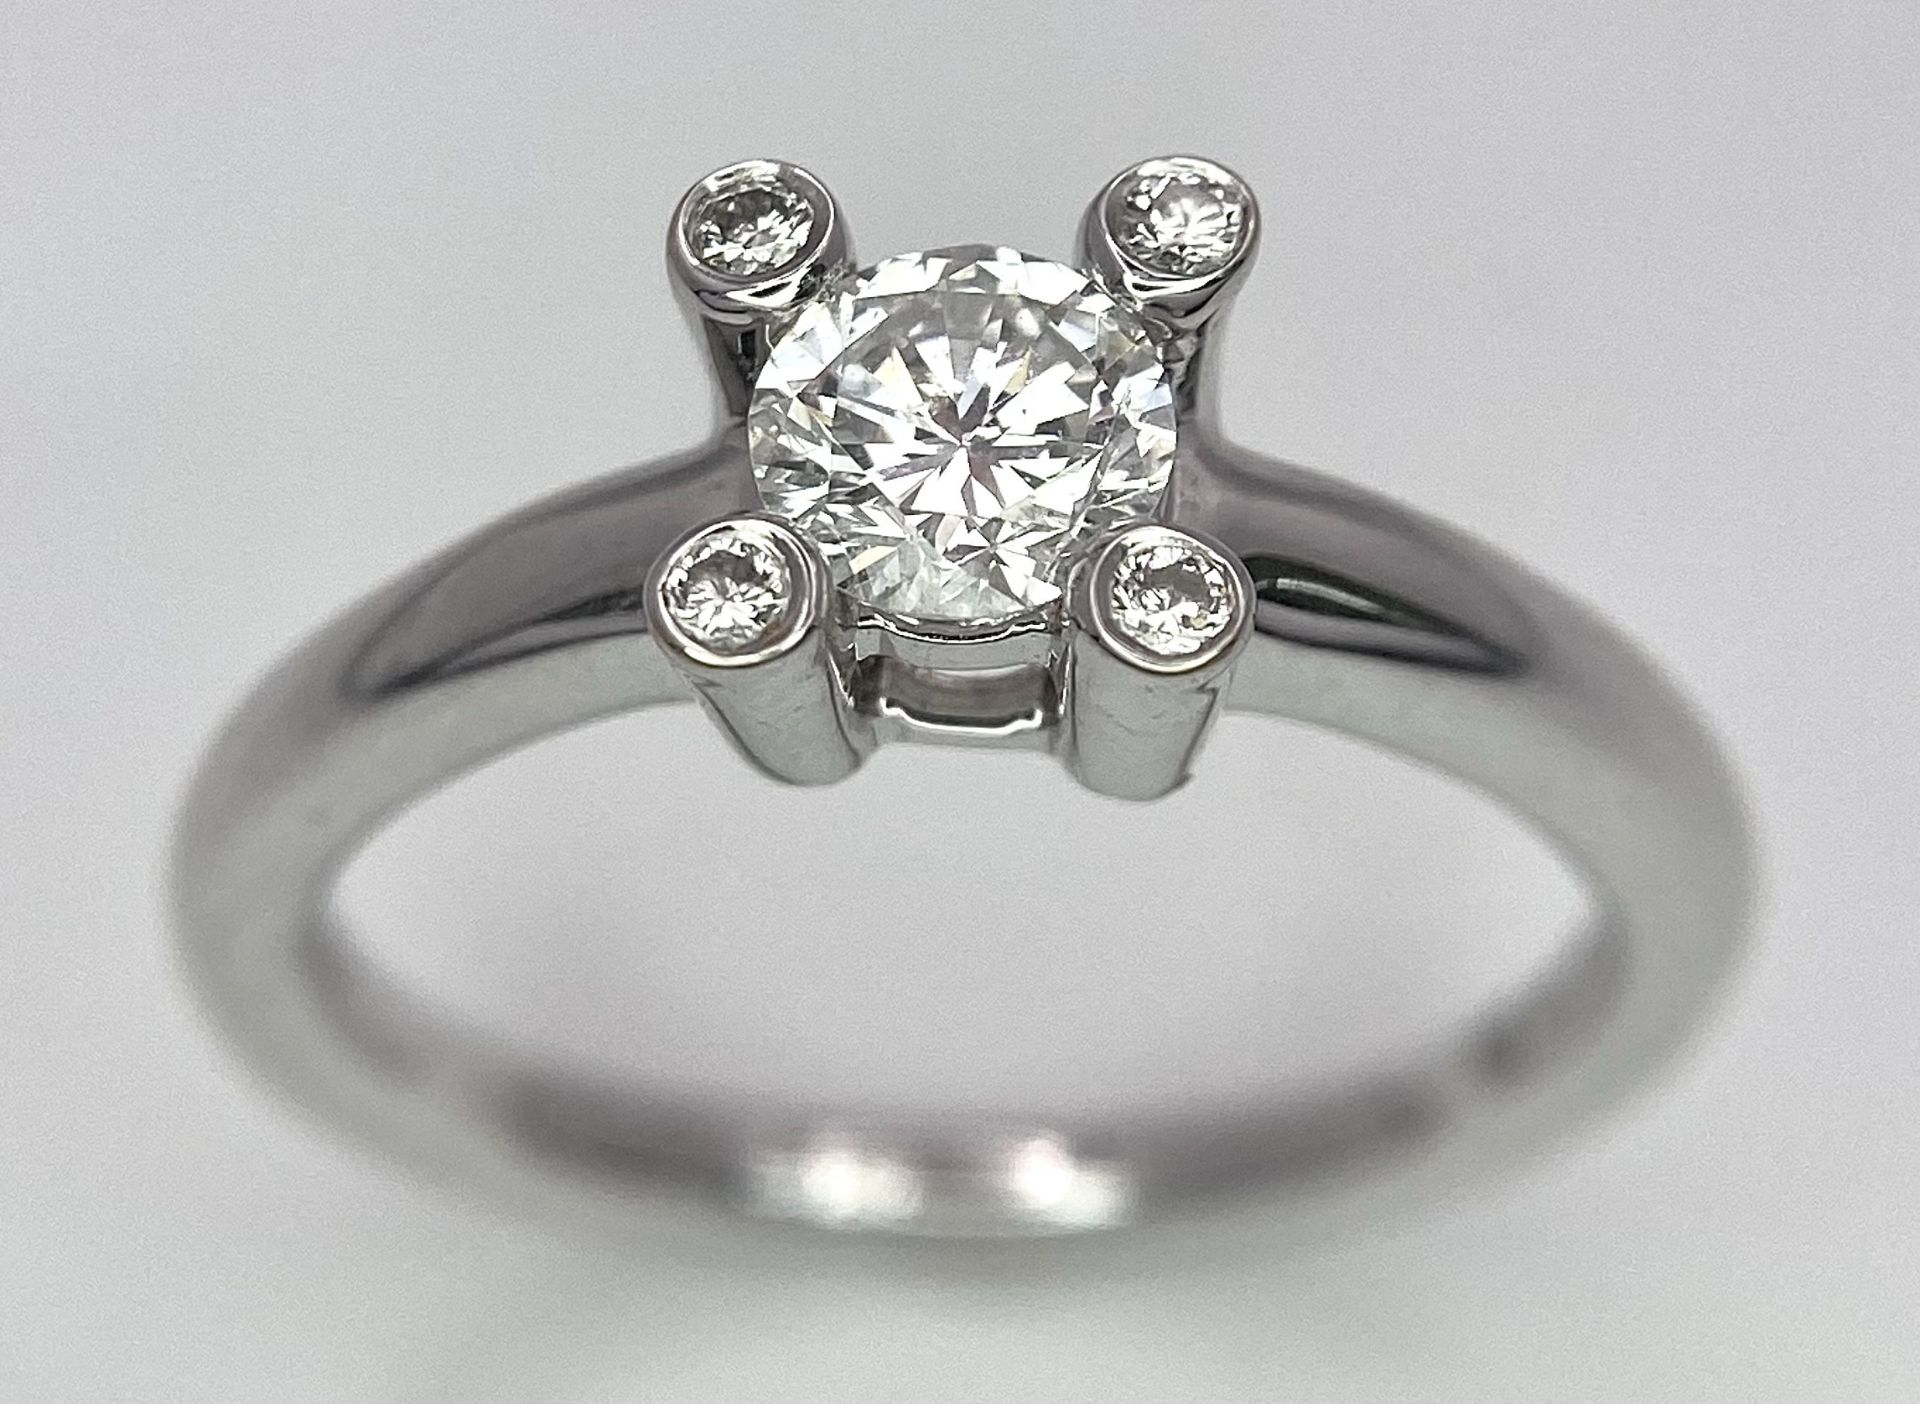 AN 18K WHITE GOLD DIAMOND SOLITAIRE RING WITH FOUR DIAMOND TURRETS - 0.50CT 4.6G. SIZE M 1/2.